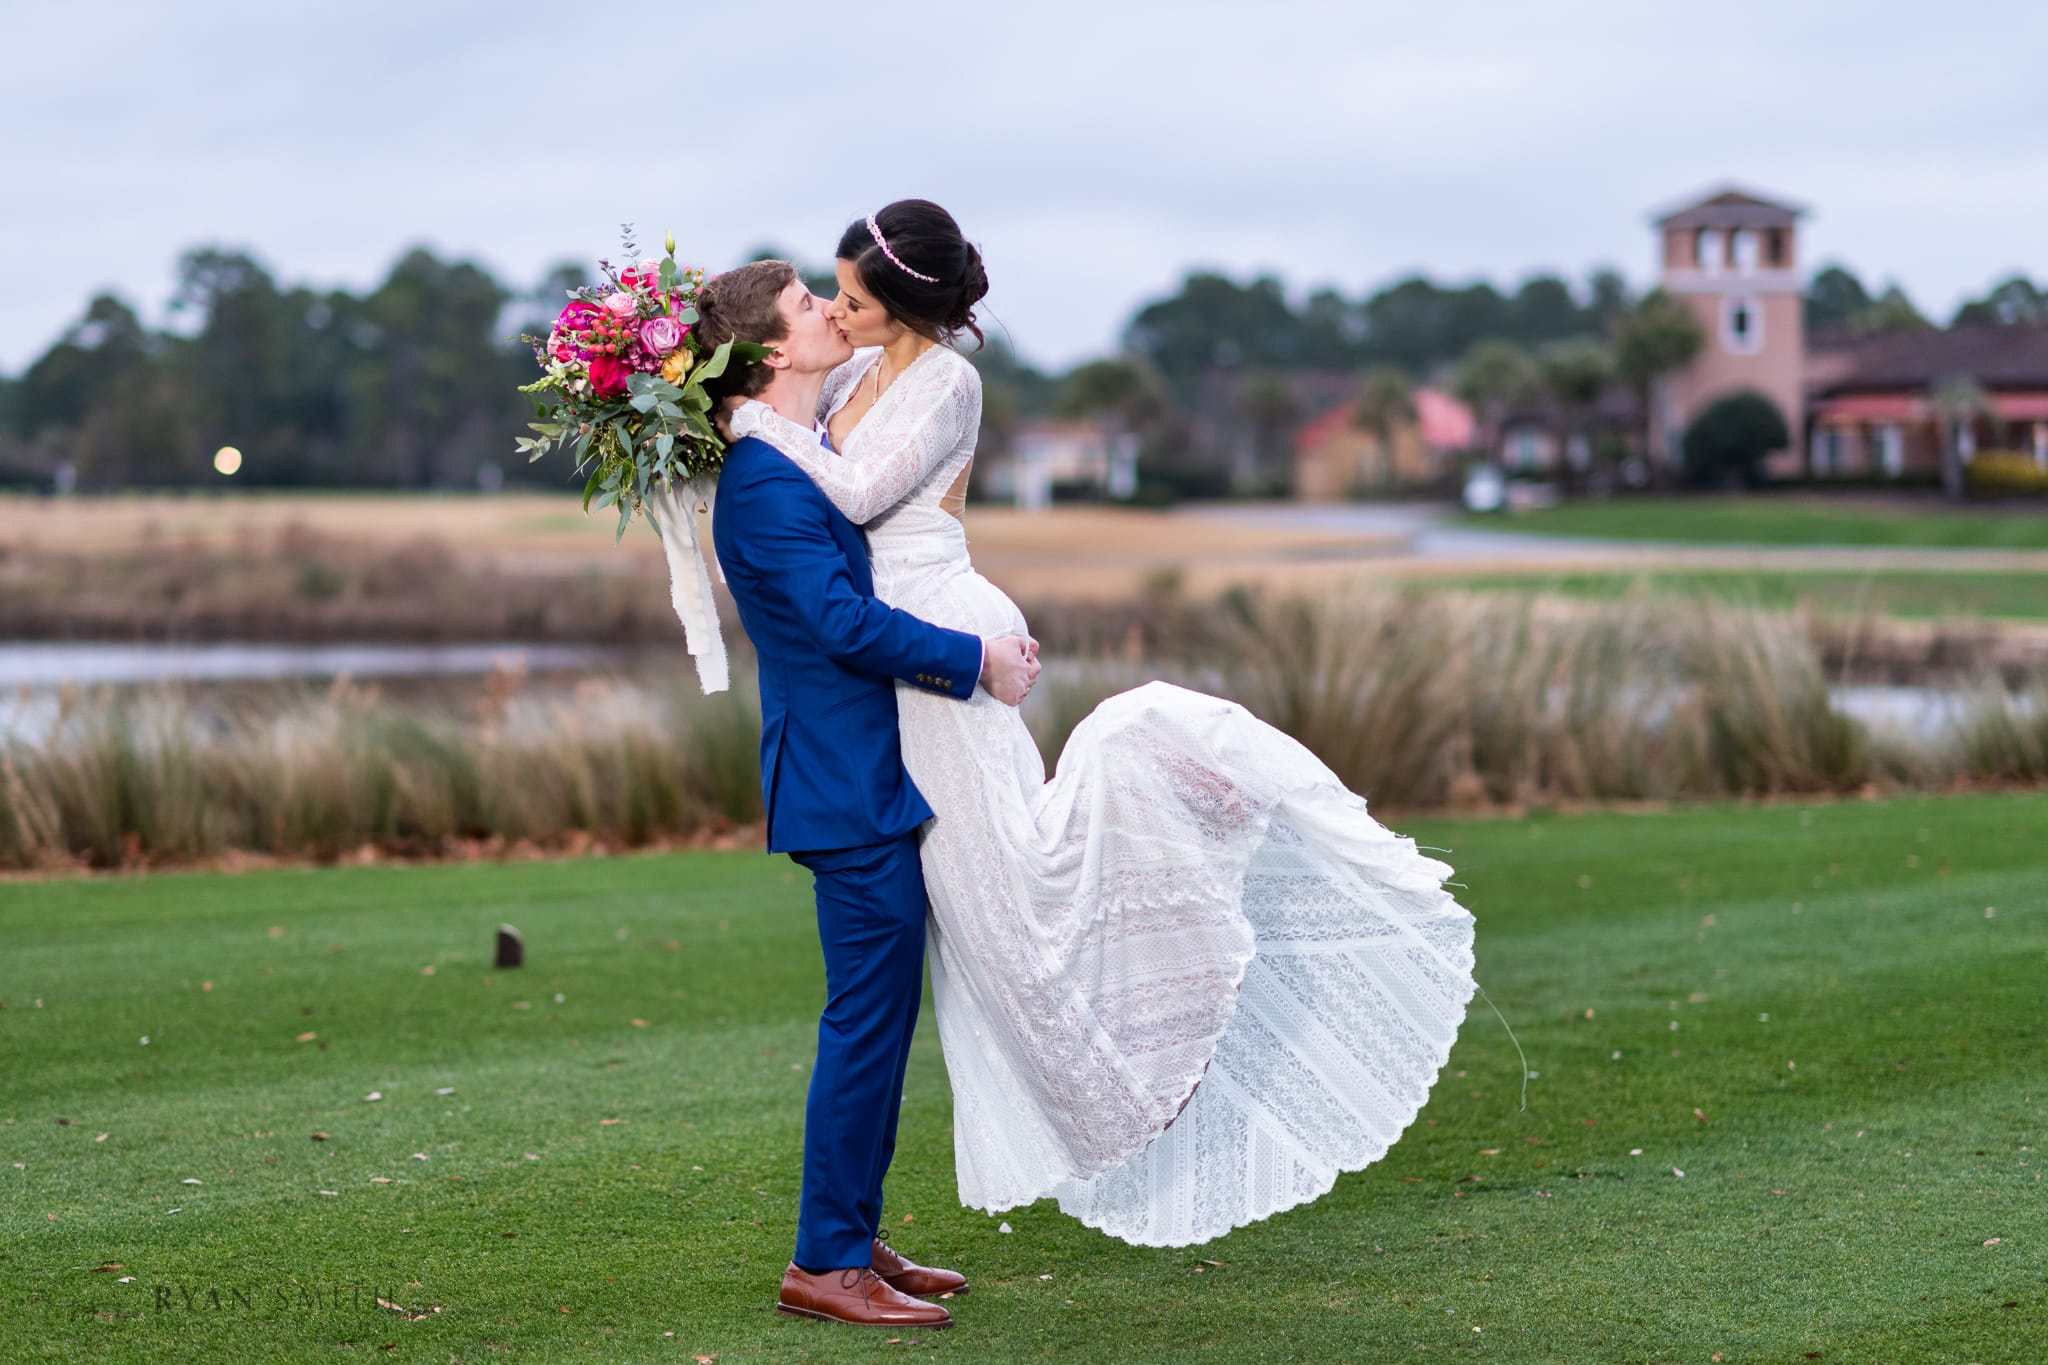 Groom lifting bride into the air for a kiss - Grande Dunes - Myrtle Beach